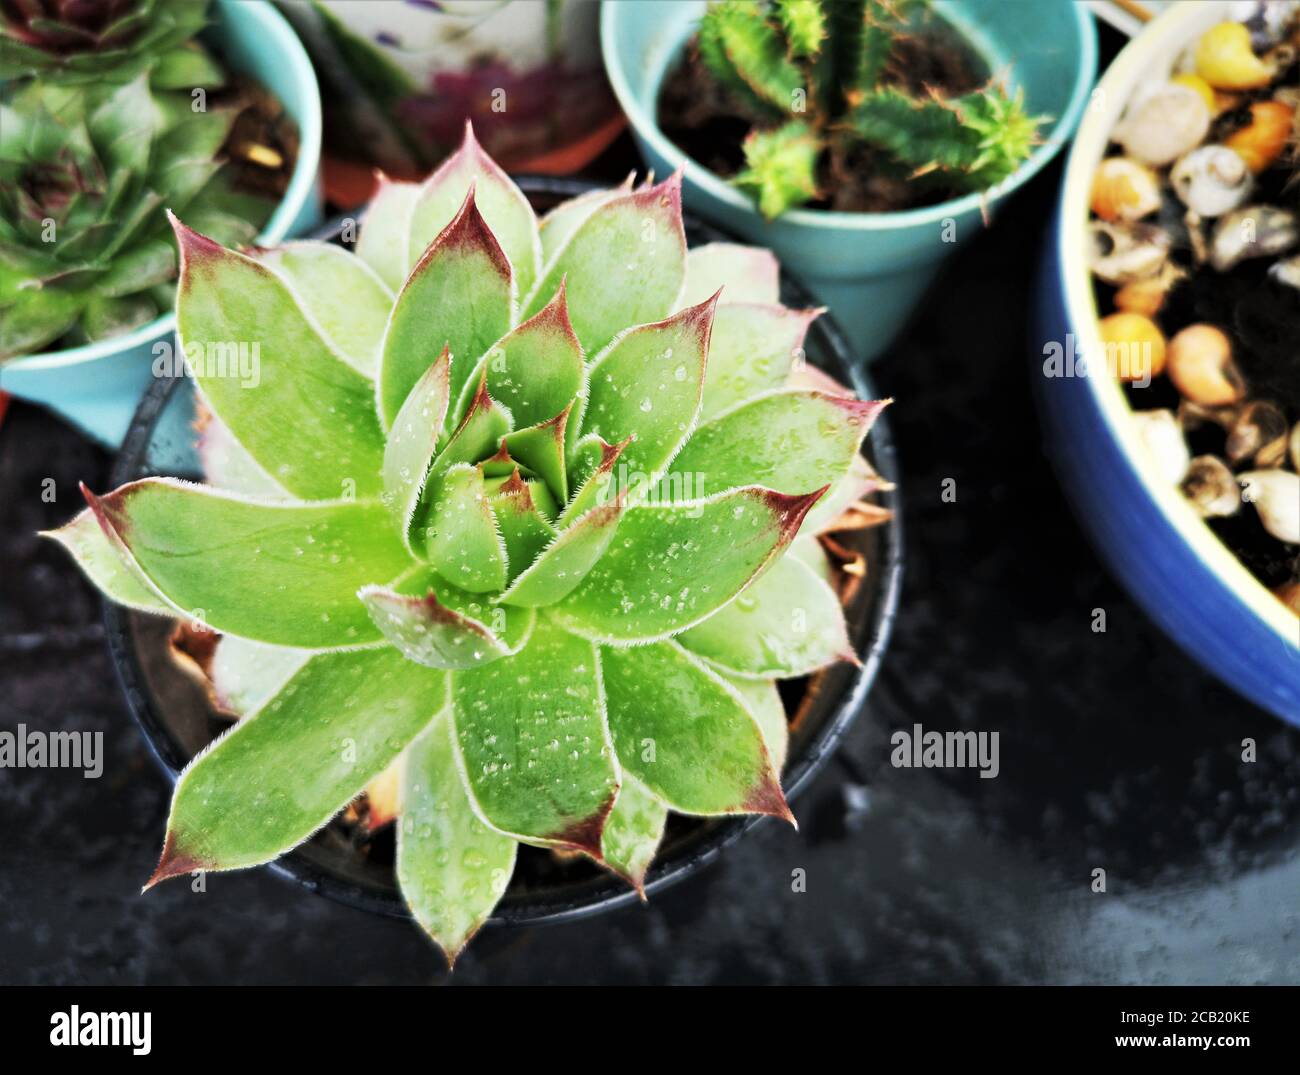 home outdoor garden with succulent close up Stock Photo